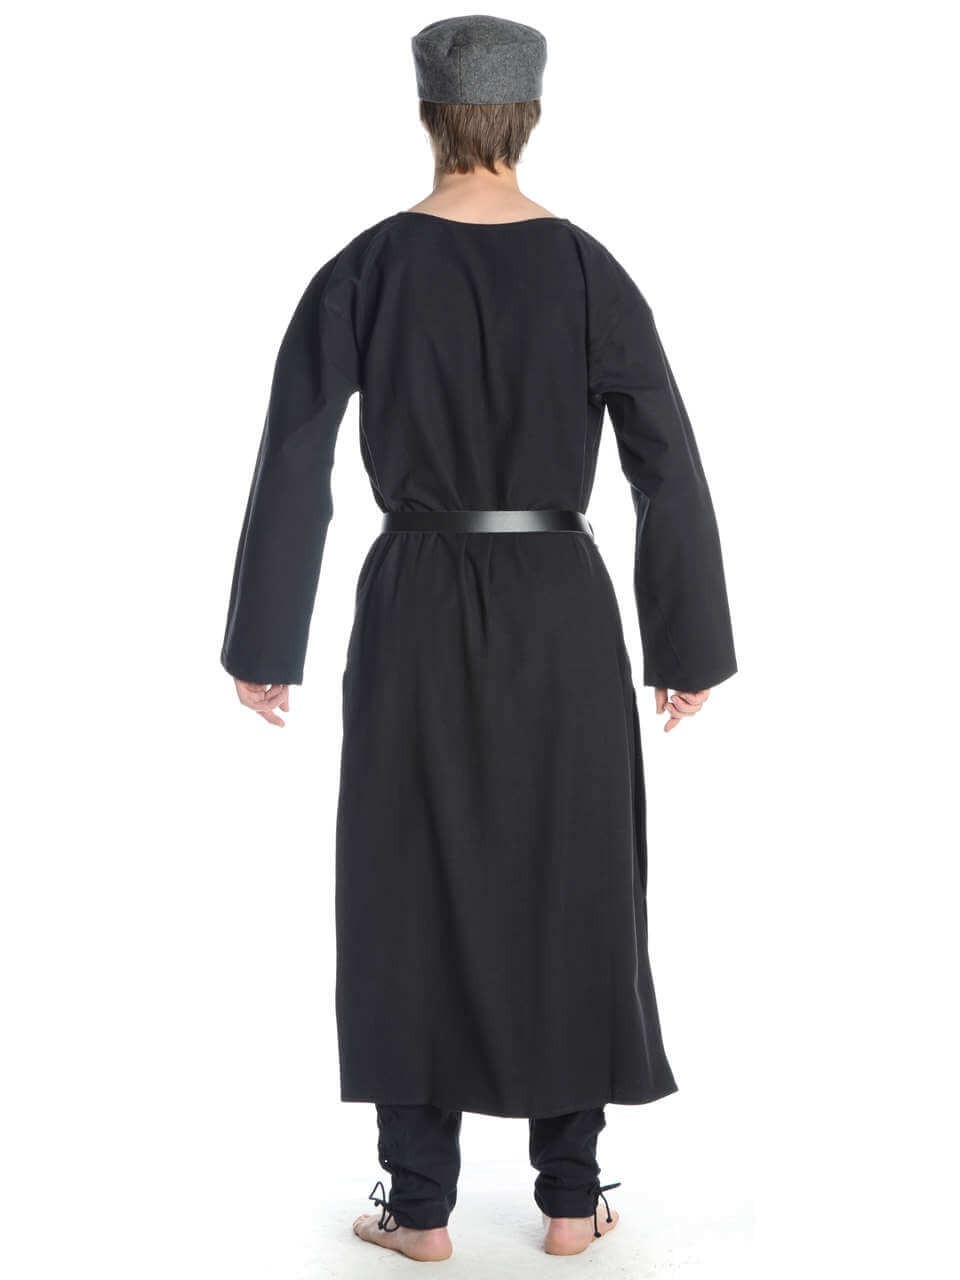 Medieval Long tunic with round collar